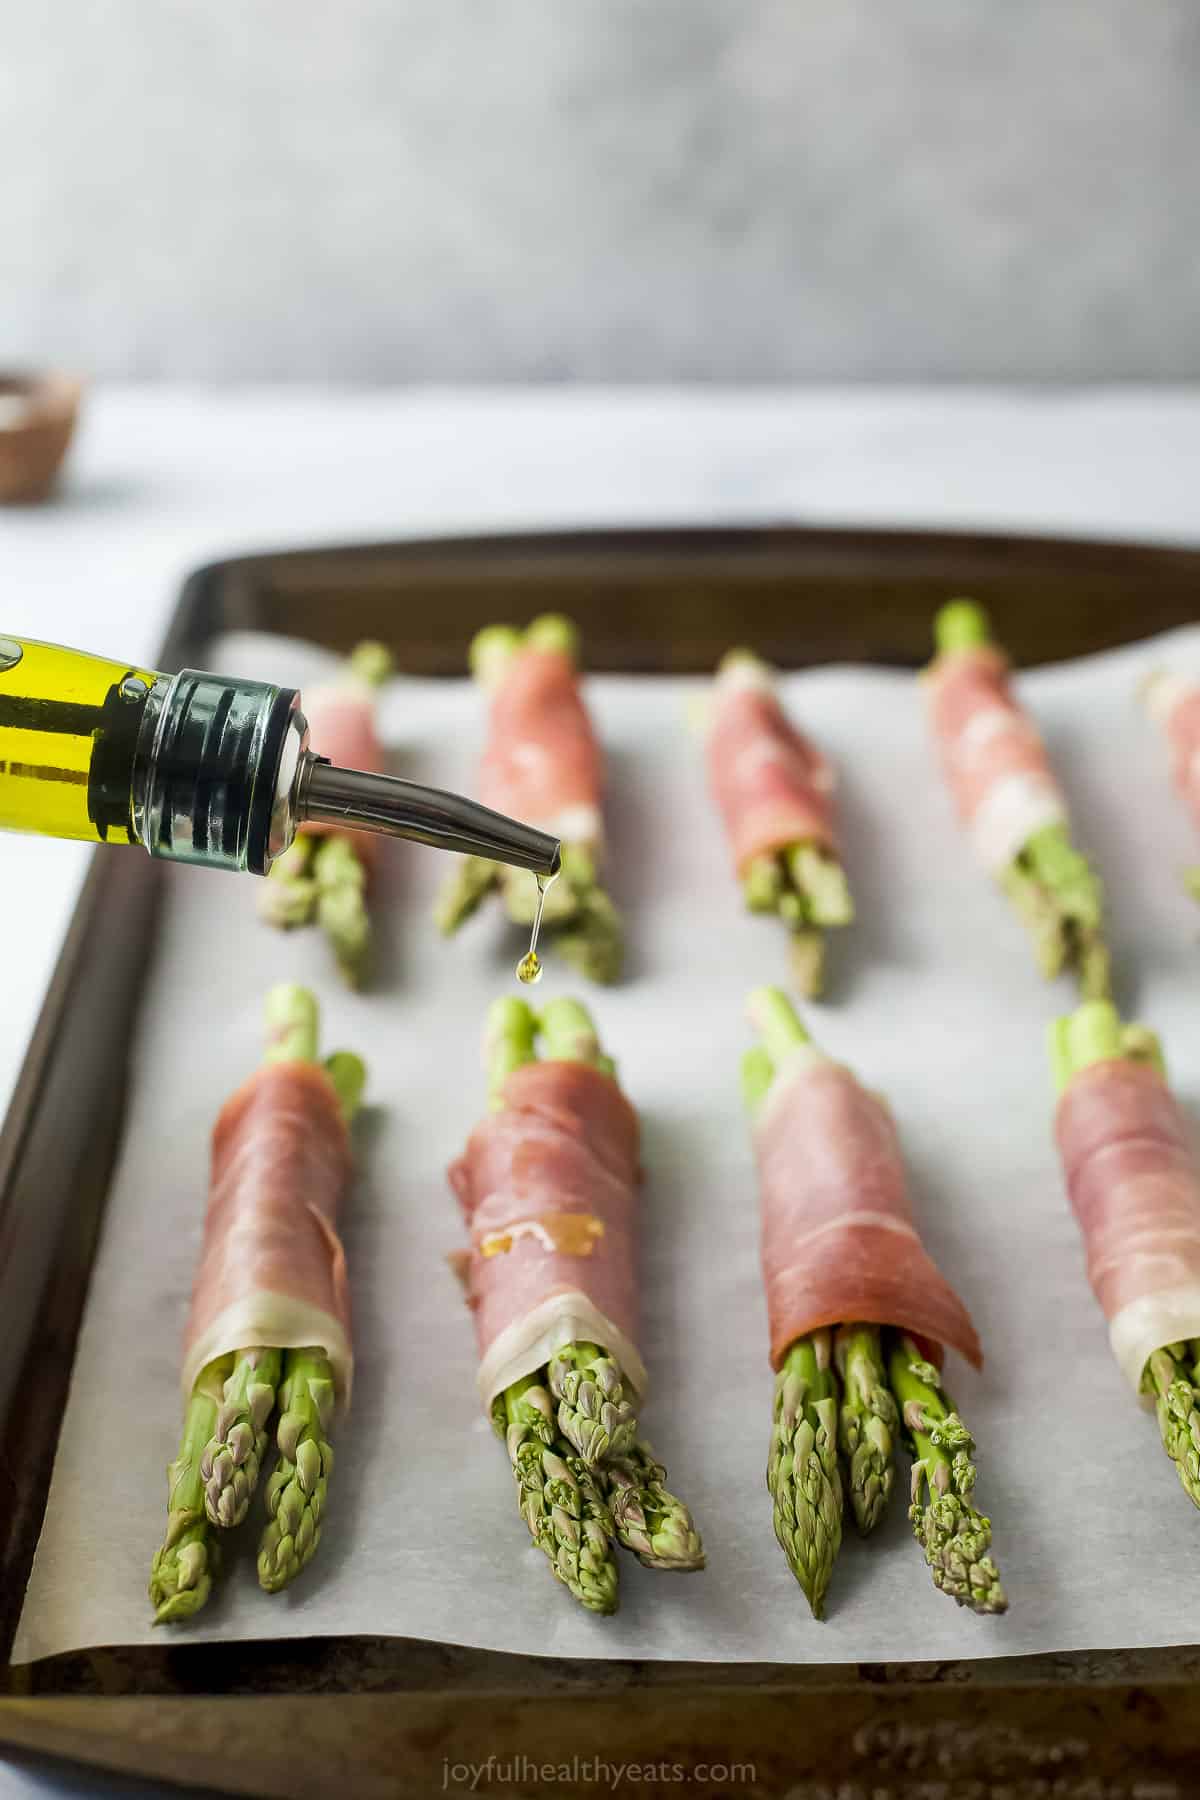 Olive oil being drizzled over prosciutto asparagus bundles on a lined baking sheet